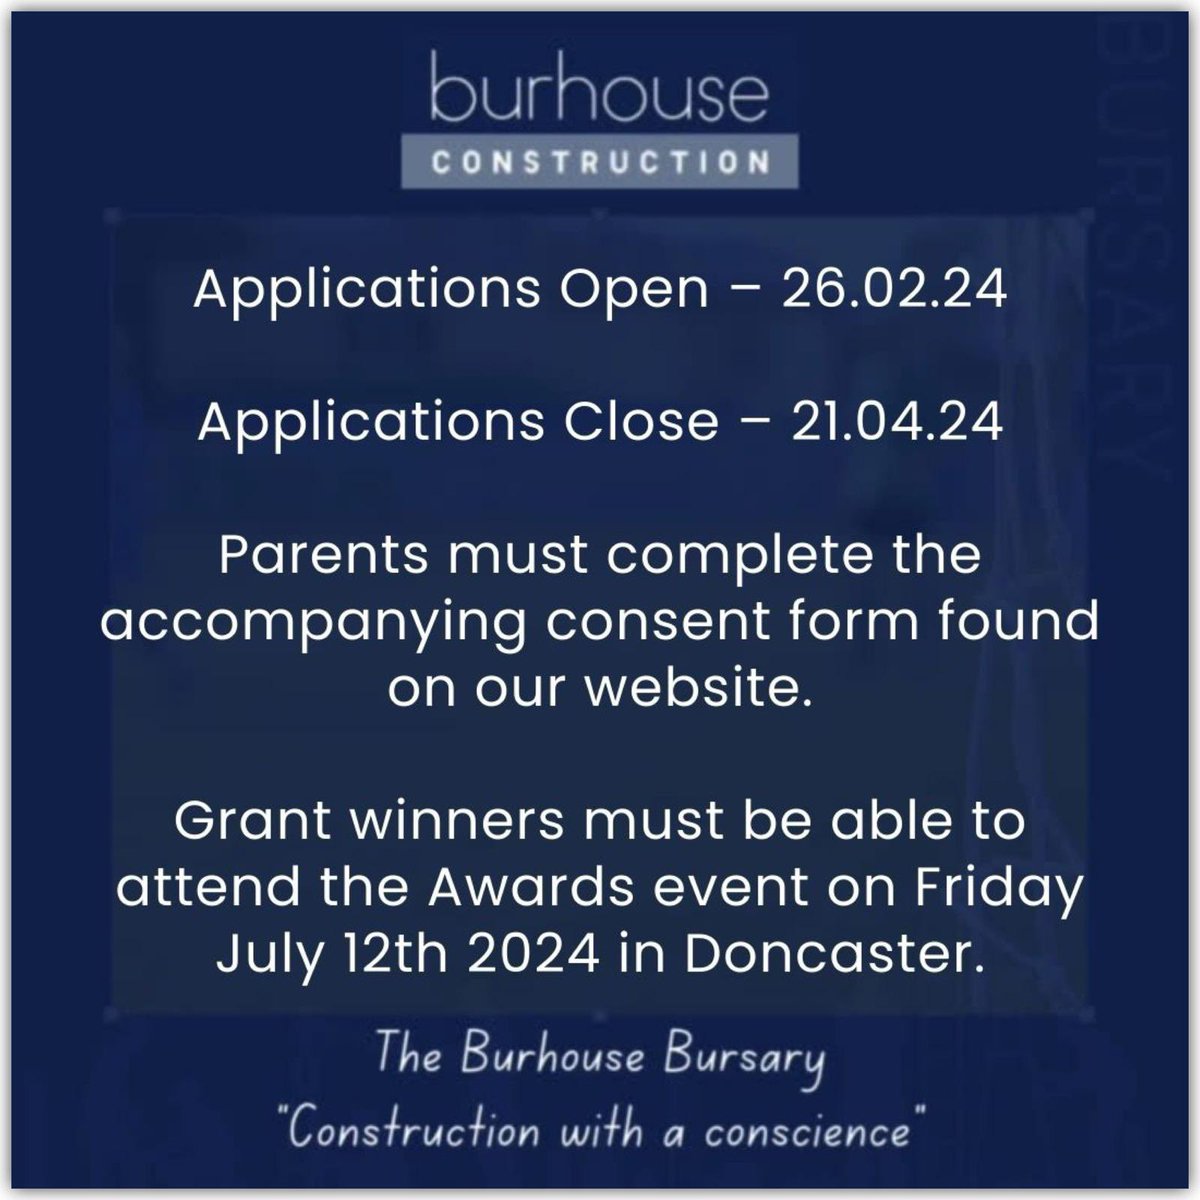 11 DAYS LEFT TO APPLY FOR THR BURSARY…

Just 11 days left to apply for the Burhouse Bursary, we have attached all info on who the bursary is aimed at, and how to apply😊

#bursary #burhousebursary #burhouseconstruction #constructionwithaconscience 
#doncasterisgreat #yorkshire